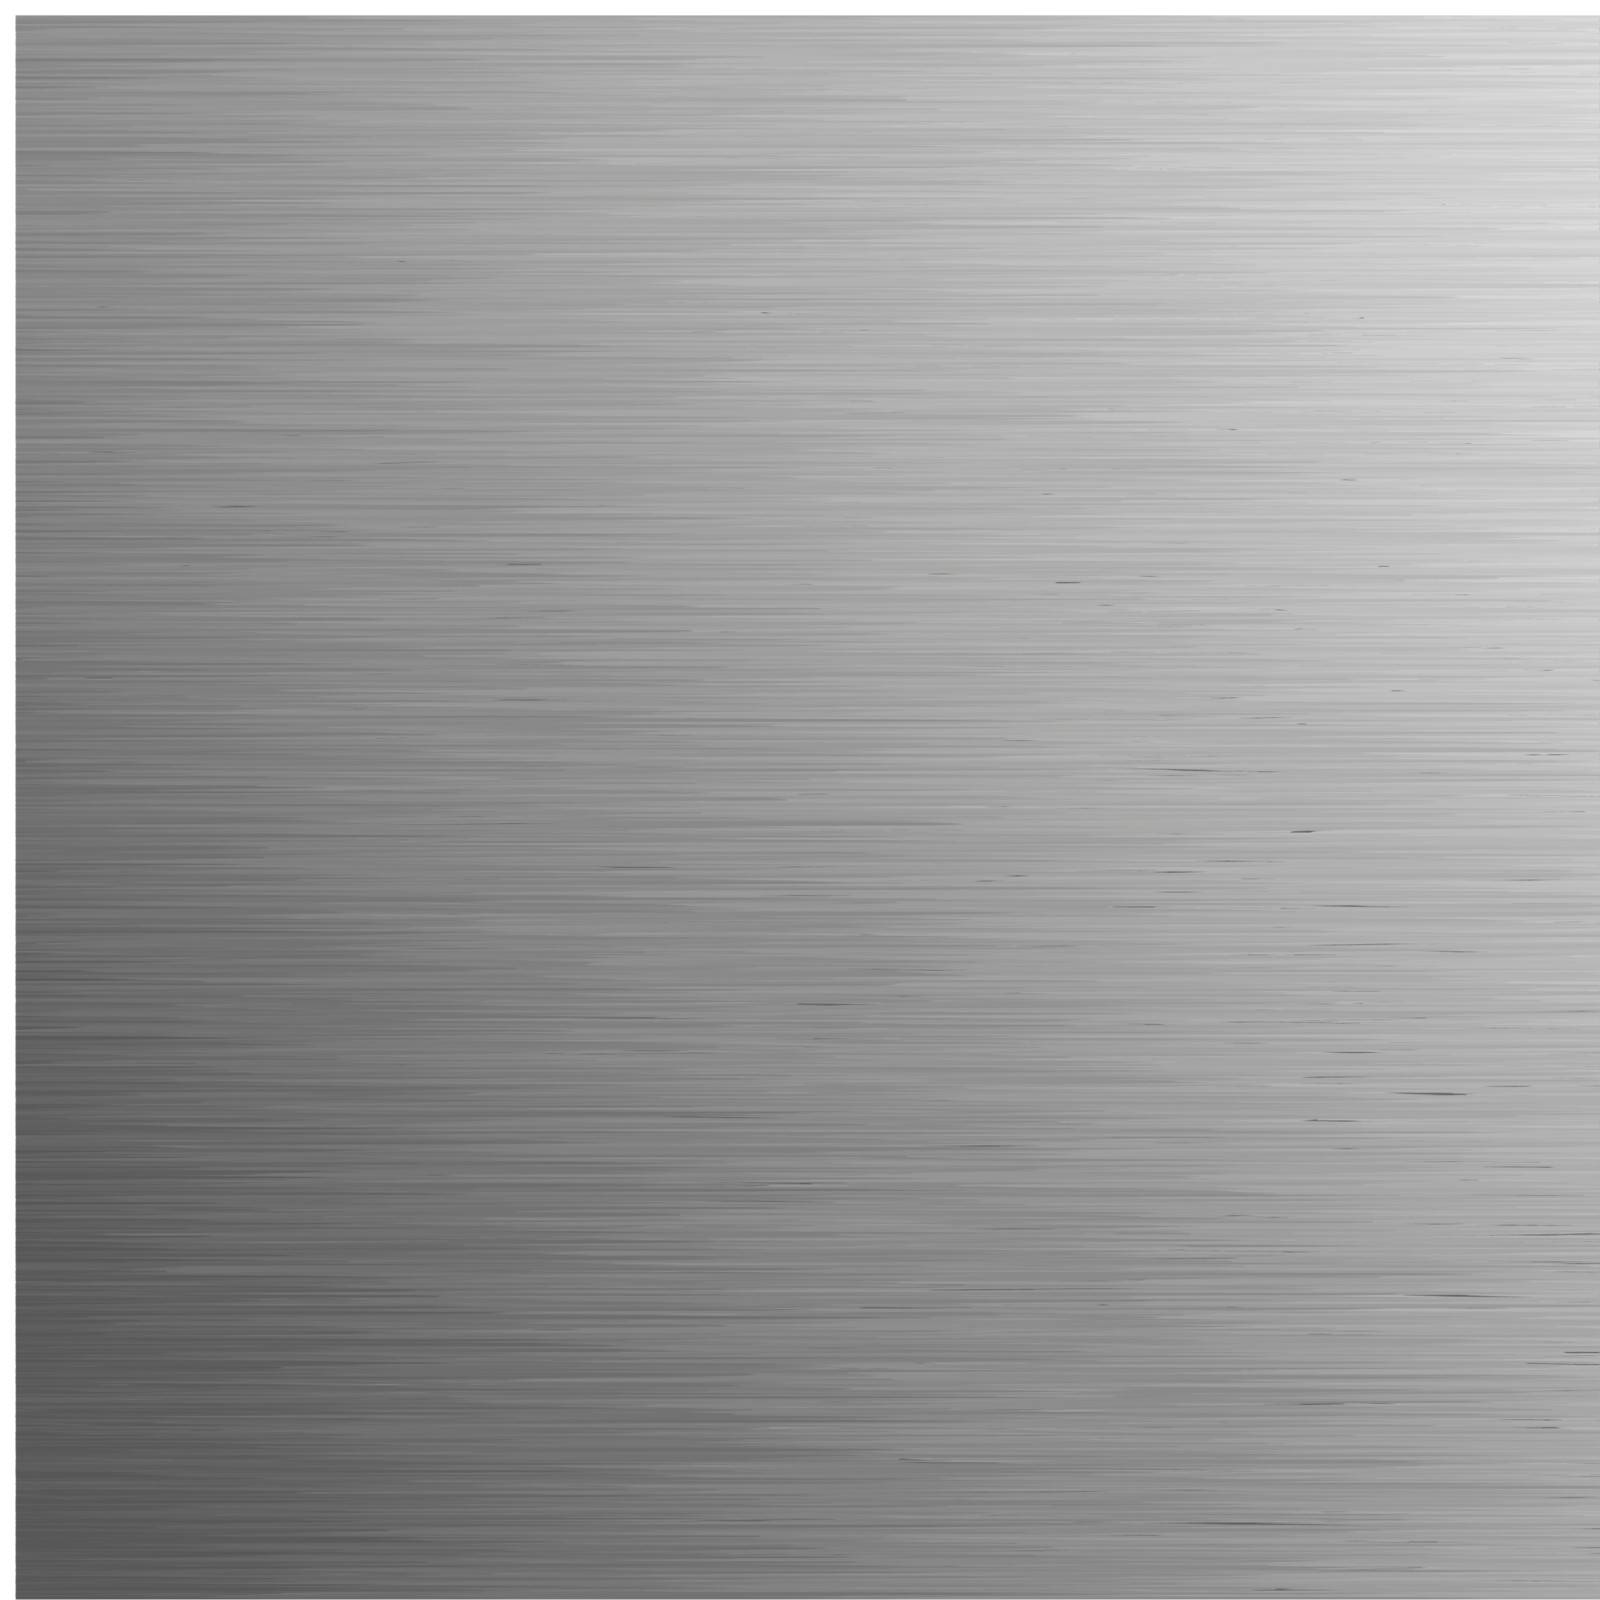 Brushed metal, template background. EPS 8 by Petrov_Vladimir